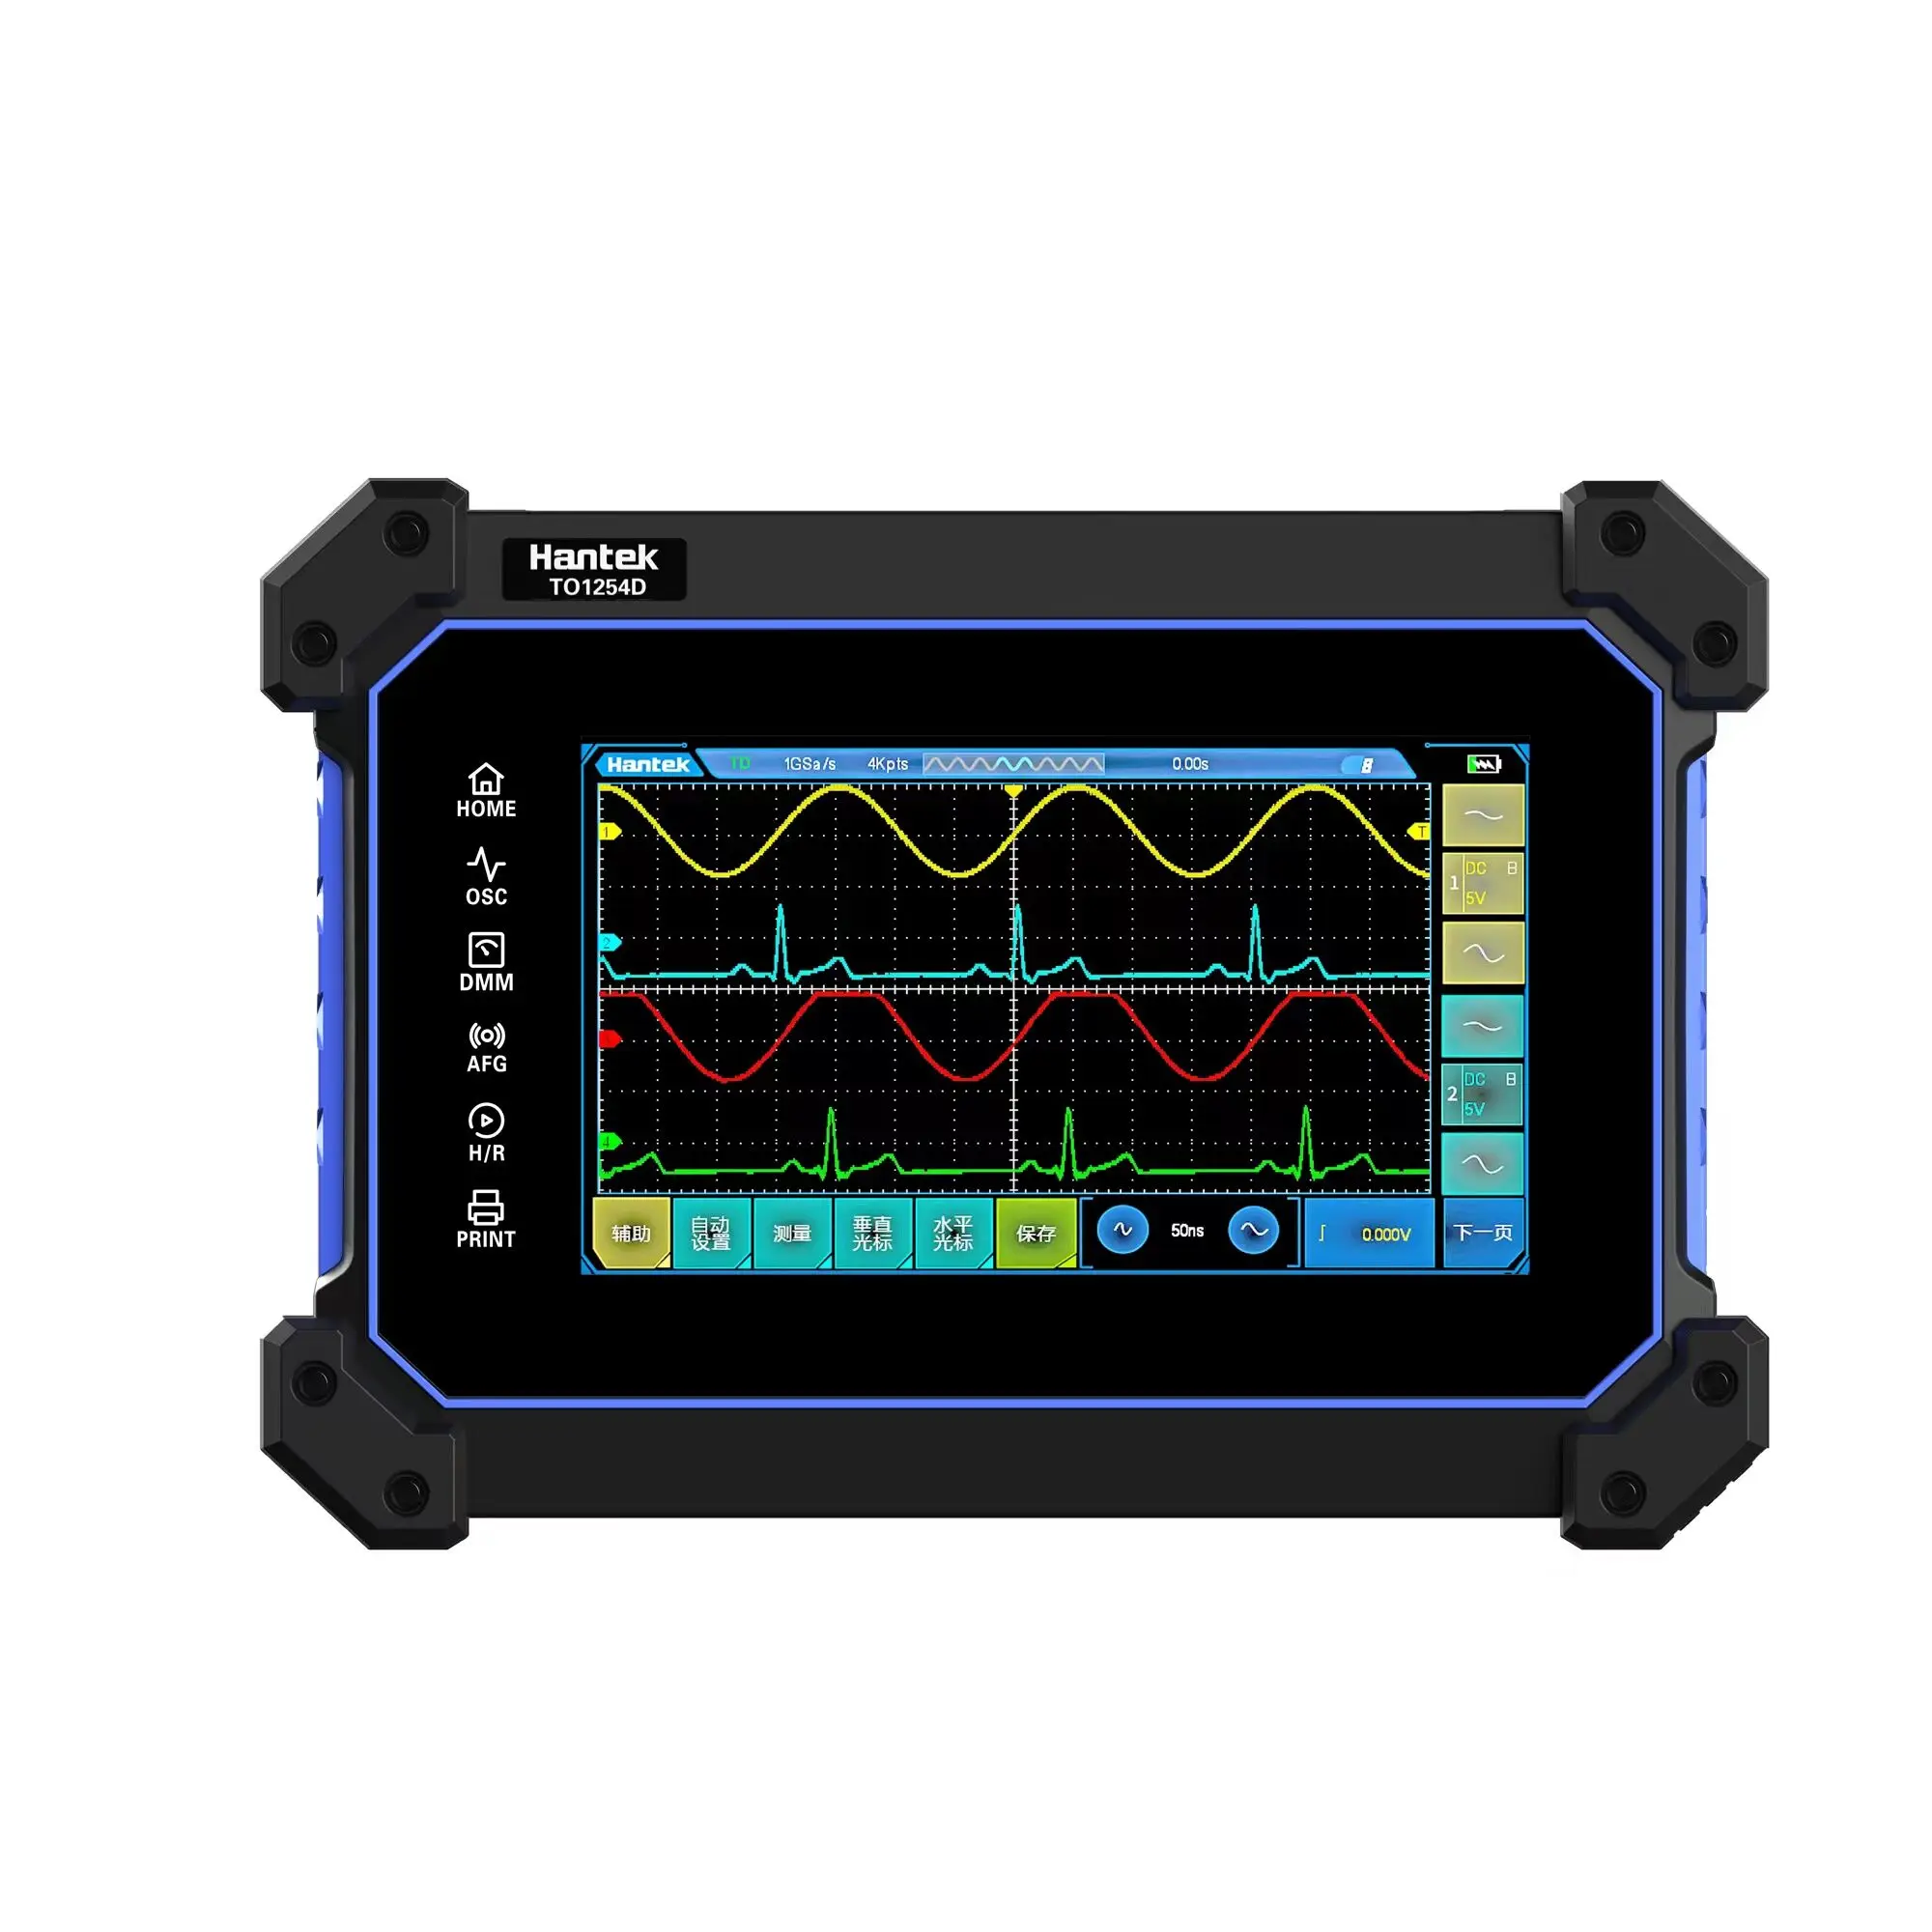 

Multi-function Full Touch Screen TO1254D 250MHz Bandwidth 1G Sa/s Sampling Rate 8M Storage depth Tablet Digital Oscilloscope